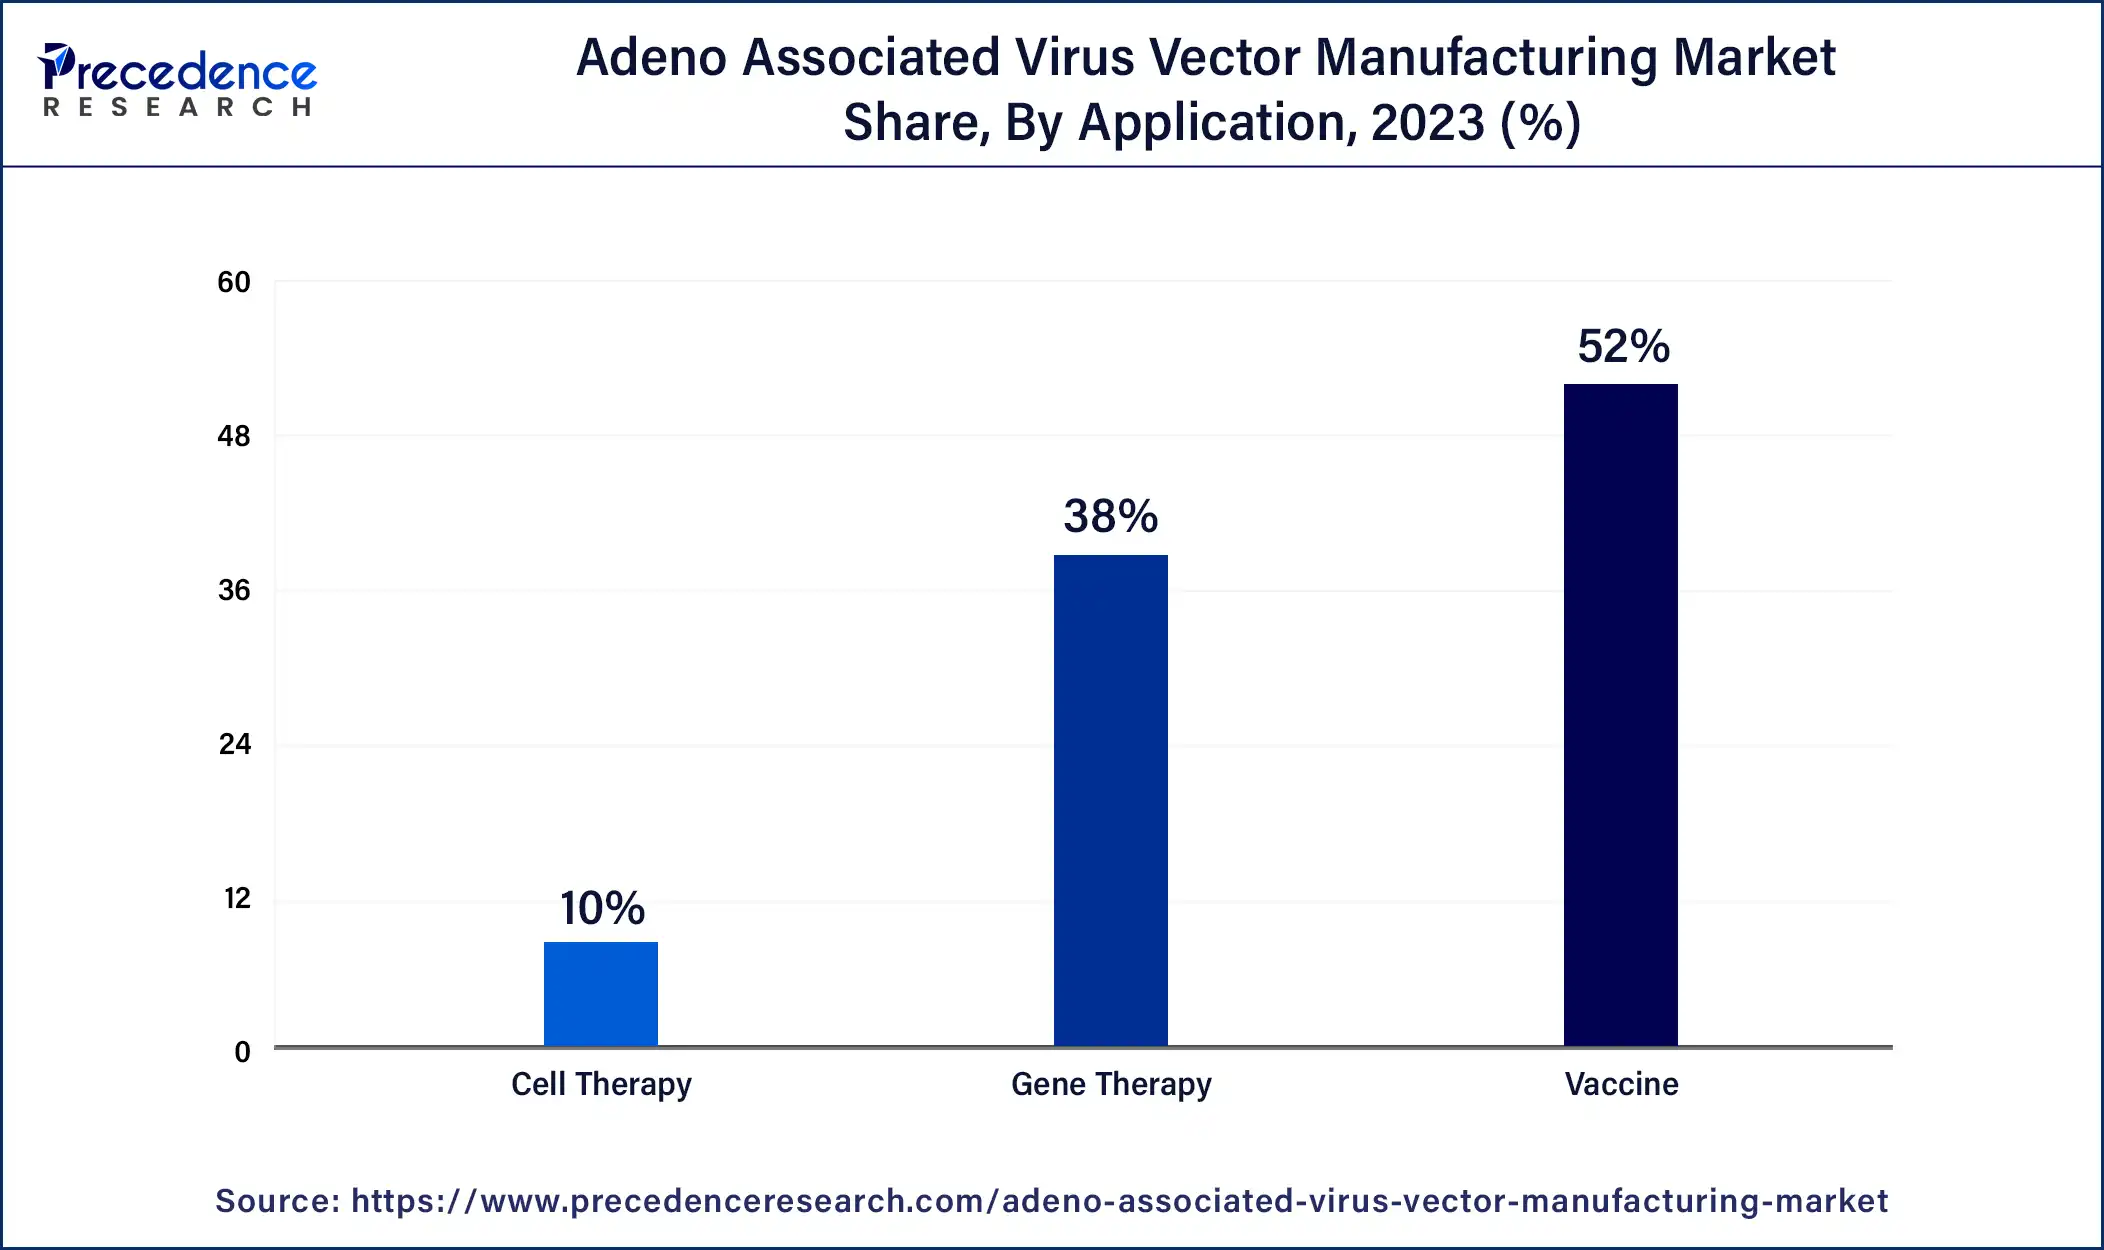 Adeno Associated Virus Vector Manufacturing Market Share, By Application, 2023 (%)